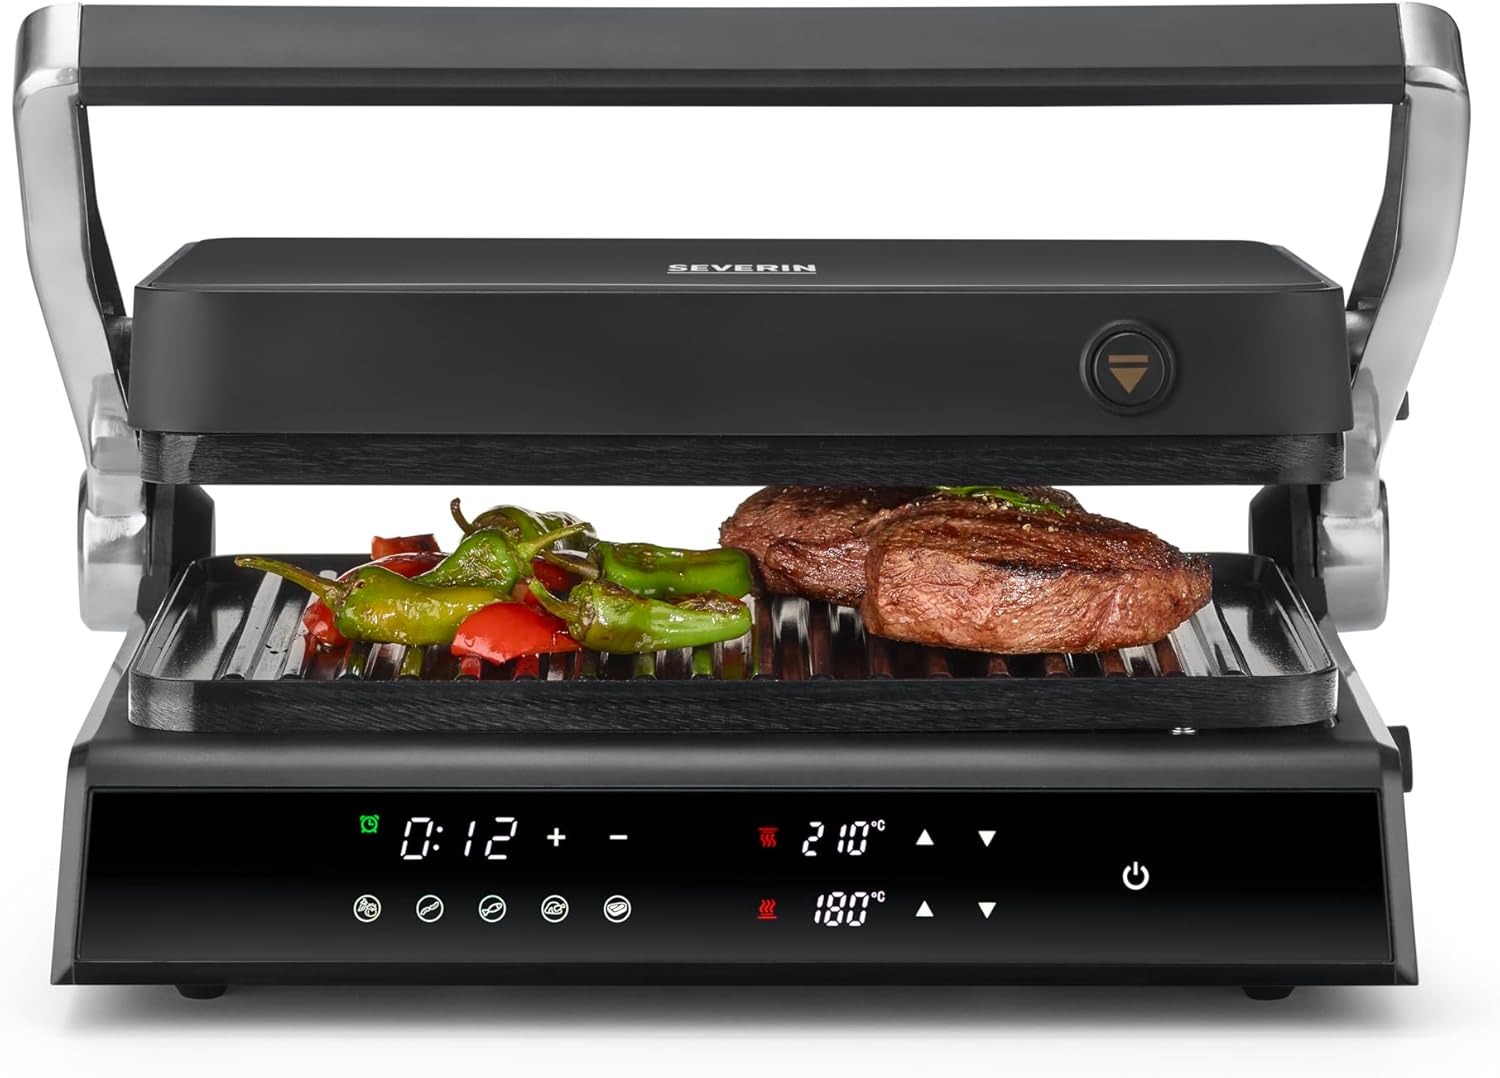 SEVERIN SEVINI Comfort for Meat, Fish & Vegetables, Digital Sandwich Maker for Grease-free Grilling with 5 Auto Programs, Ceramic Coated, Indoor Grill up to 230 °C Heat, 1,800 W, Black, KG 2399